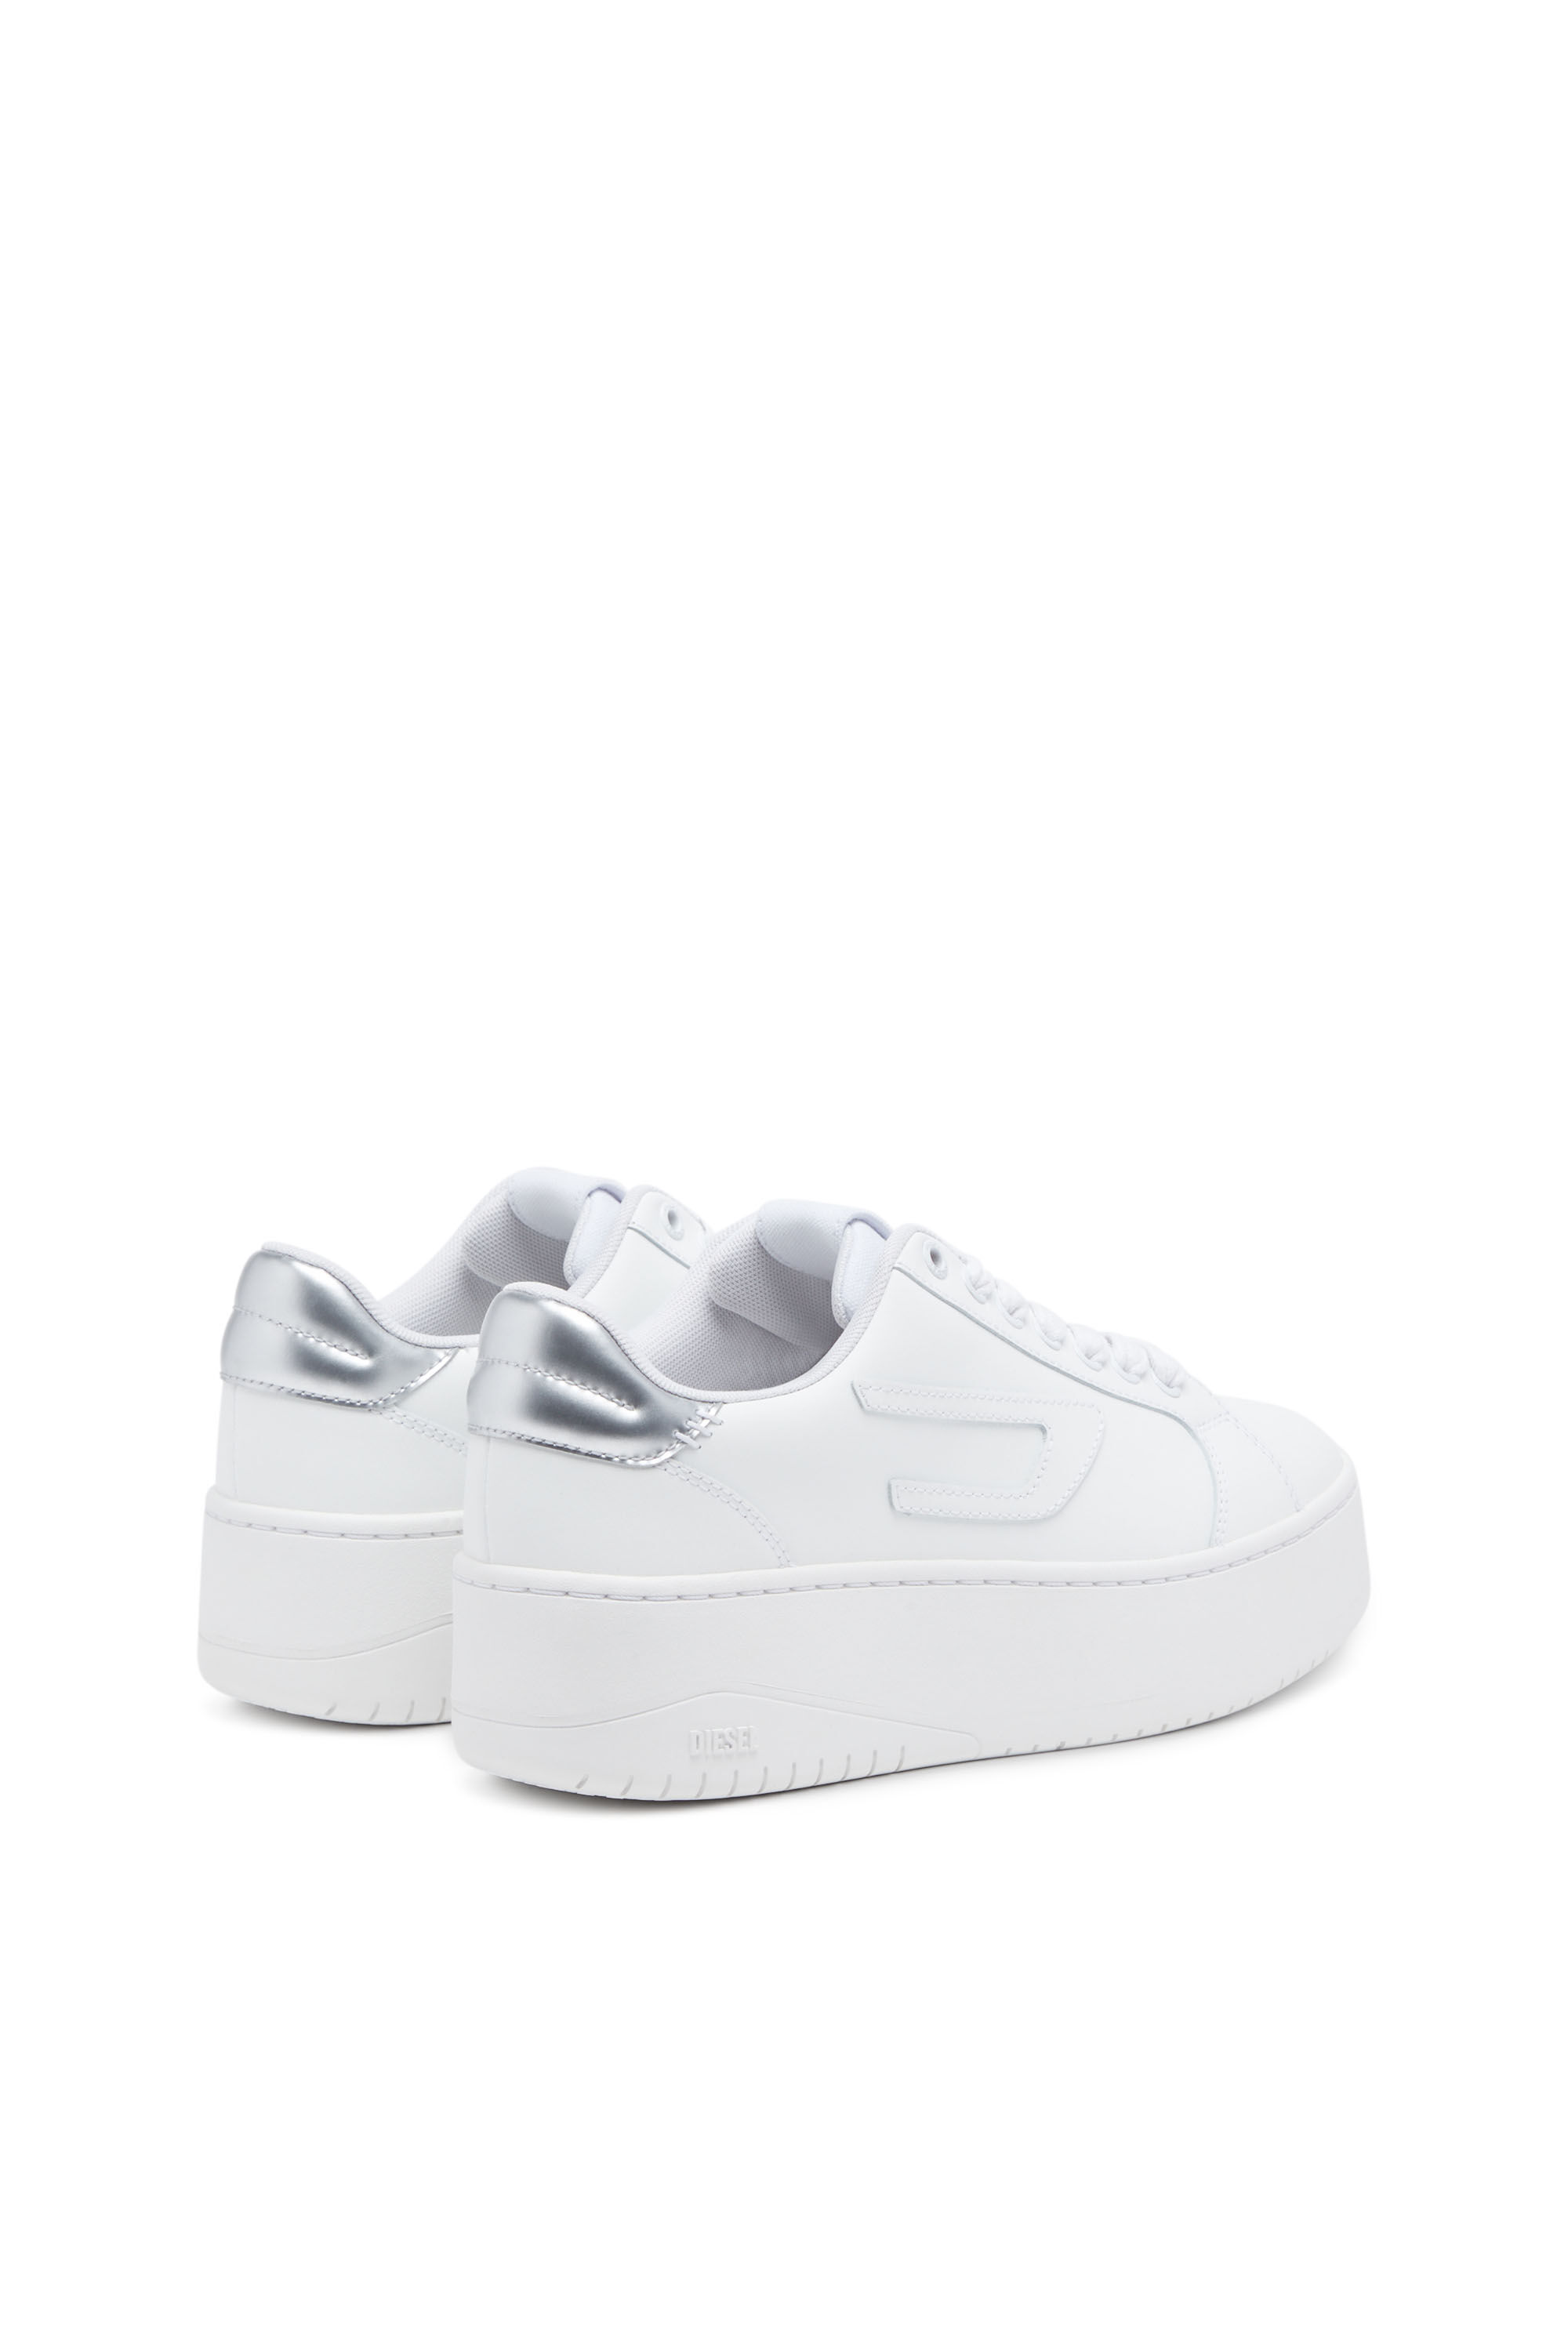 Diesel - S-ATHENE BOLD W, Woman S-Athene Bold-Low-top sneakers with flatform sole in White - Image 3